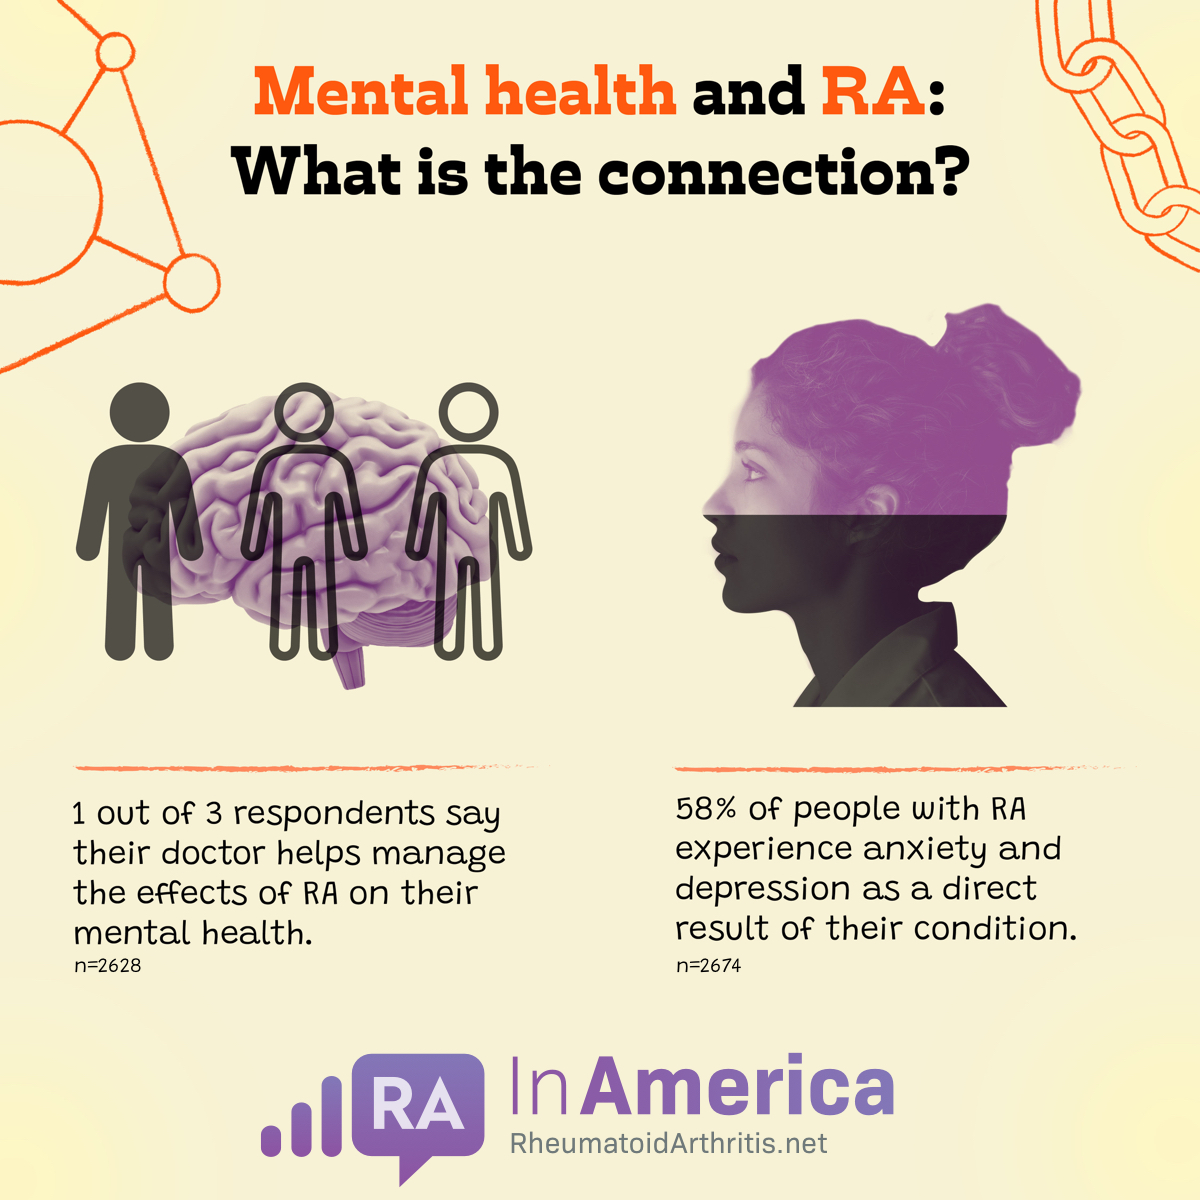 Three stick figures stand in front of a brain representing that 33% of survey respondents say their doctor helps manage the mental impact of RA, while a woman pensively faces to the left to reflect that 57% of people with RA experience anxiety and depression.